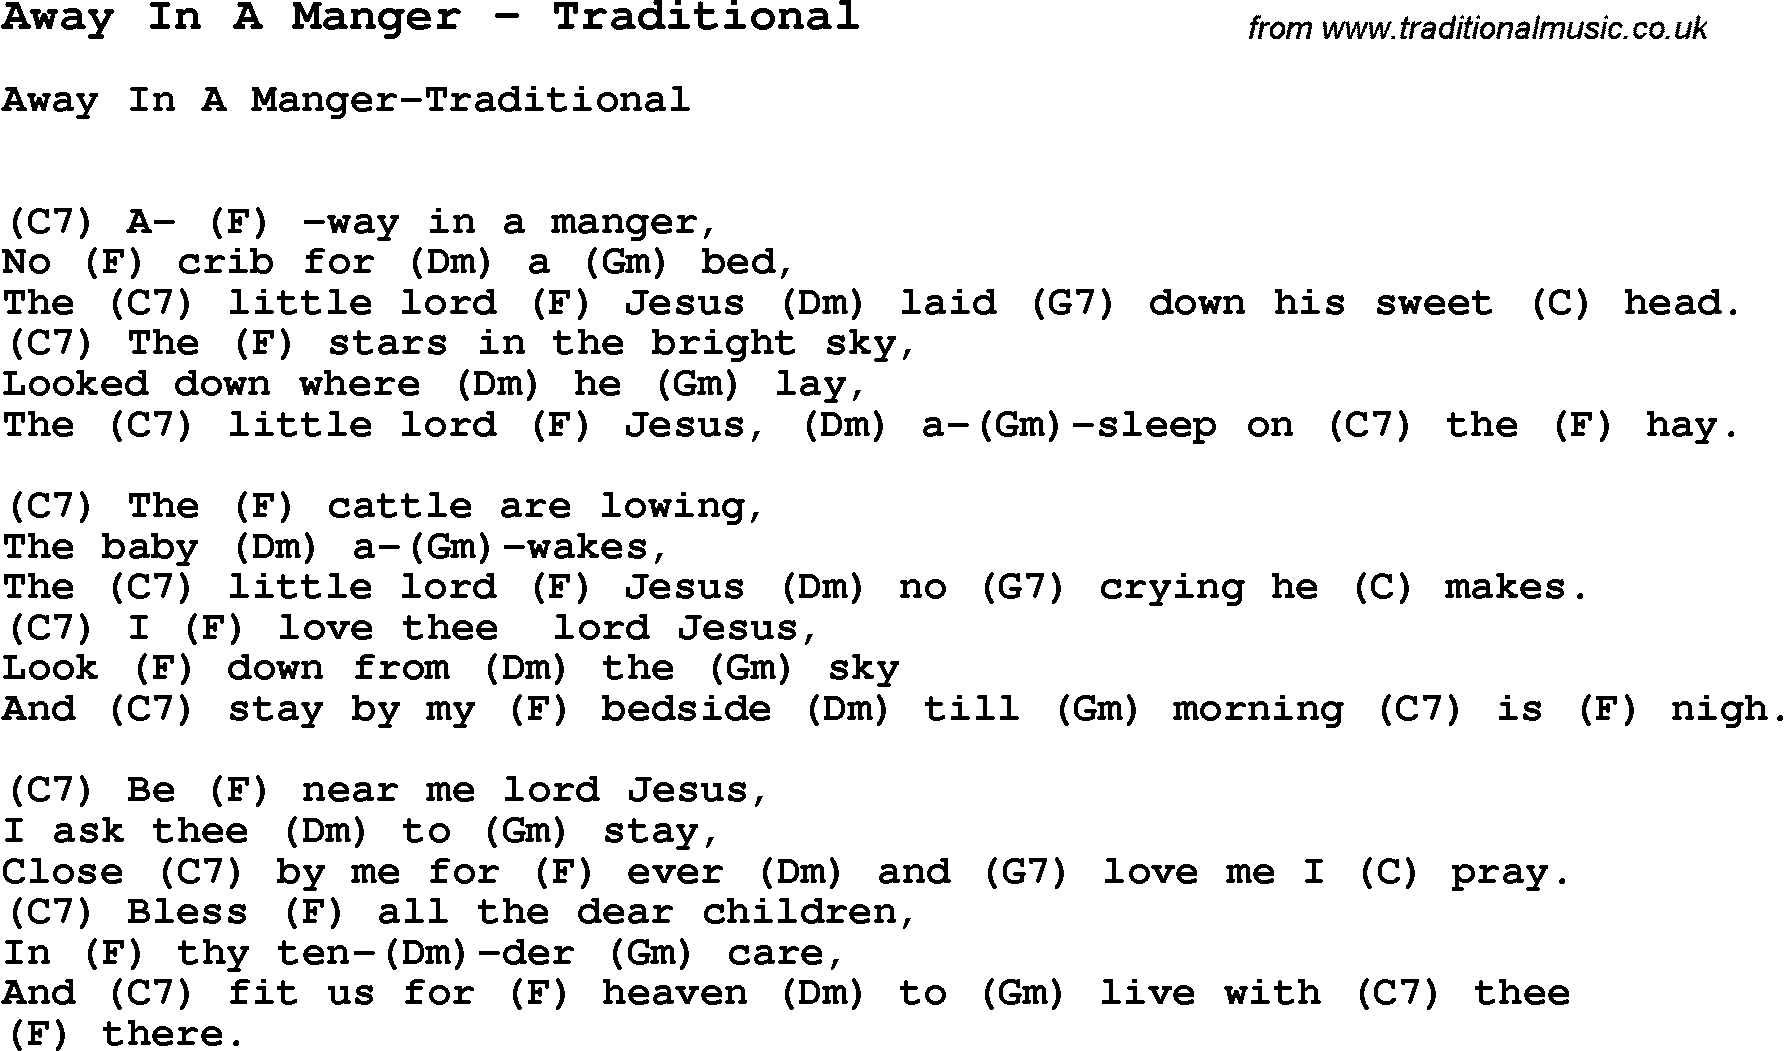 Song Away In A Manger by Traditional, with lyrics for vocal performance and accompaniment chords for Ukulele, Guitar Banjo etc.